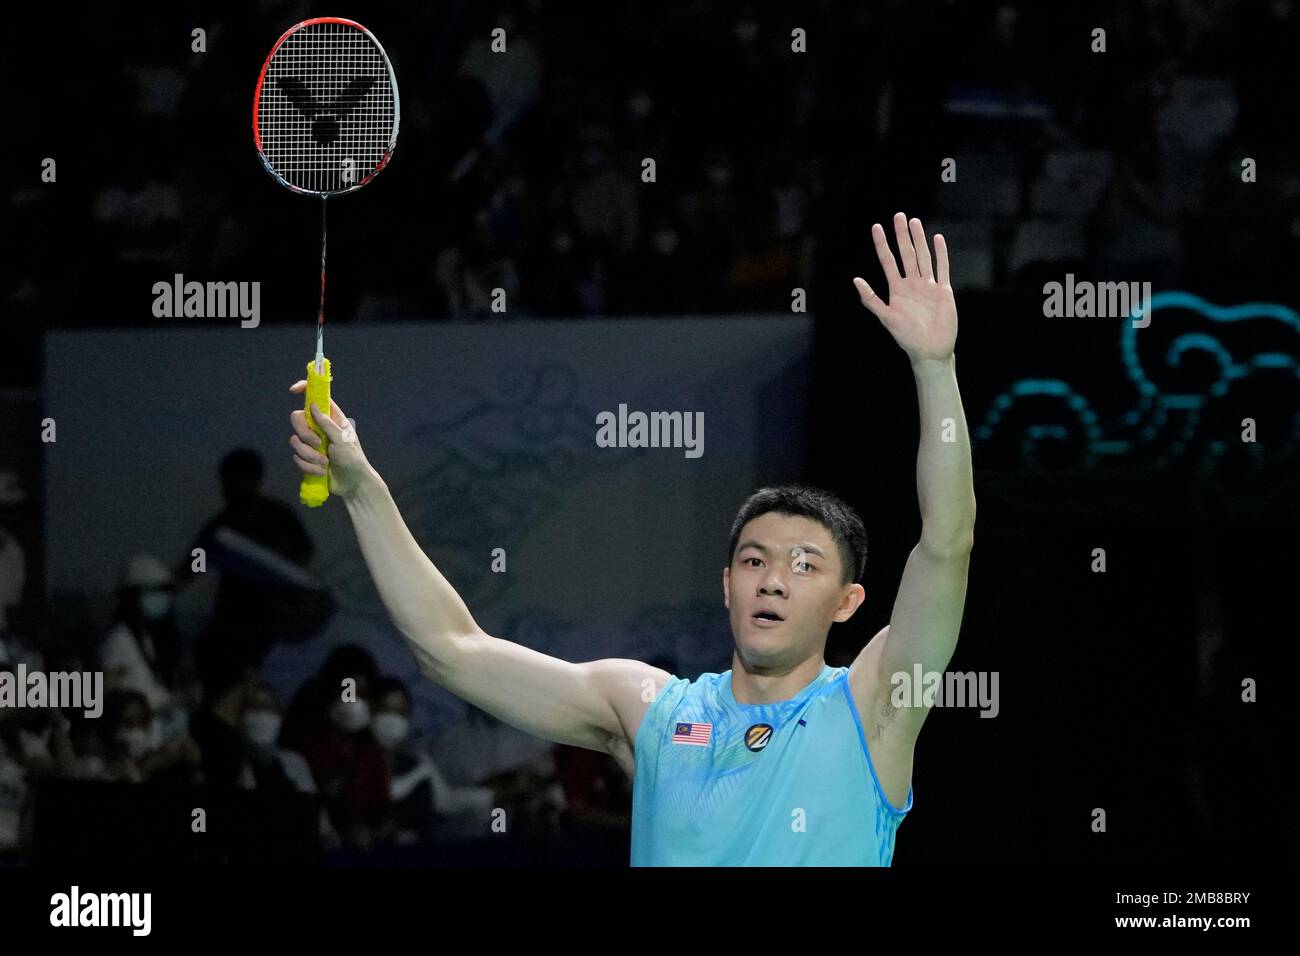 Malaysias Lee Zii Jia celebrates after defeating Singapores Loh Kean Yew during their mens singles quarterfinal match at Indonesia Open badminton tournament at Istora Gelora Bung Karno Stadium in Jakarta, Indonesia, Friday,